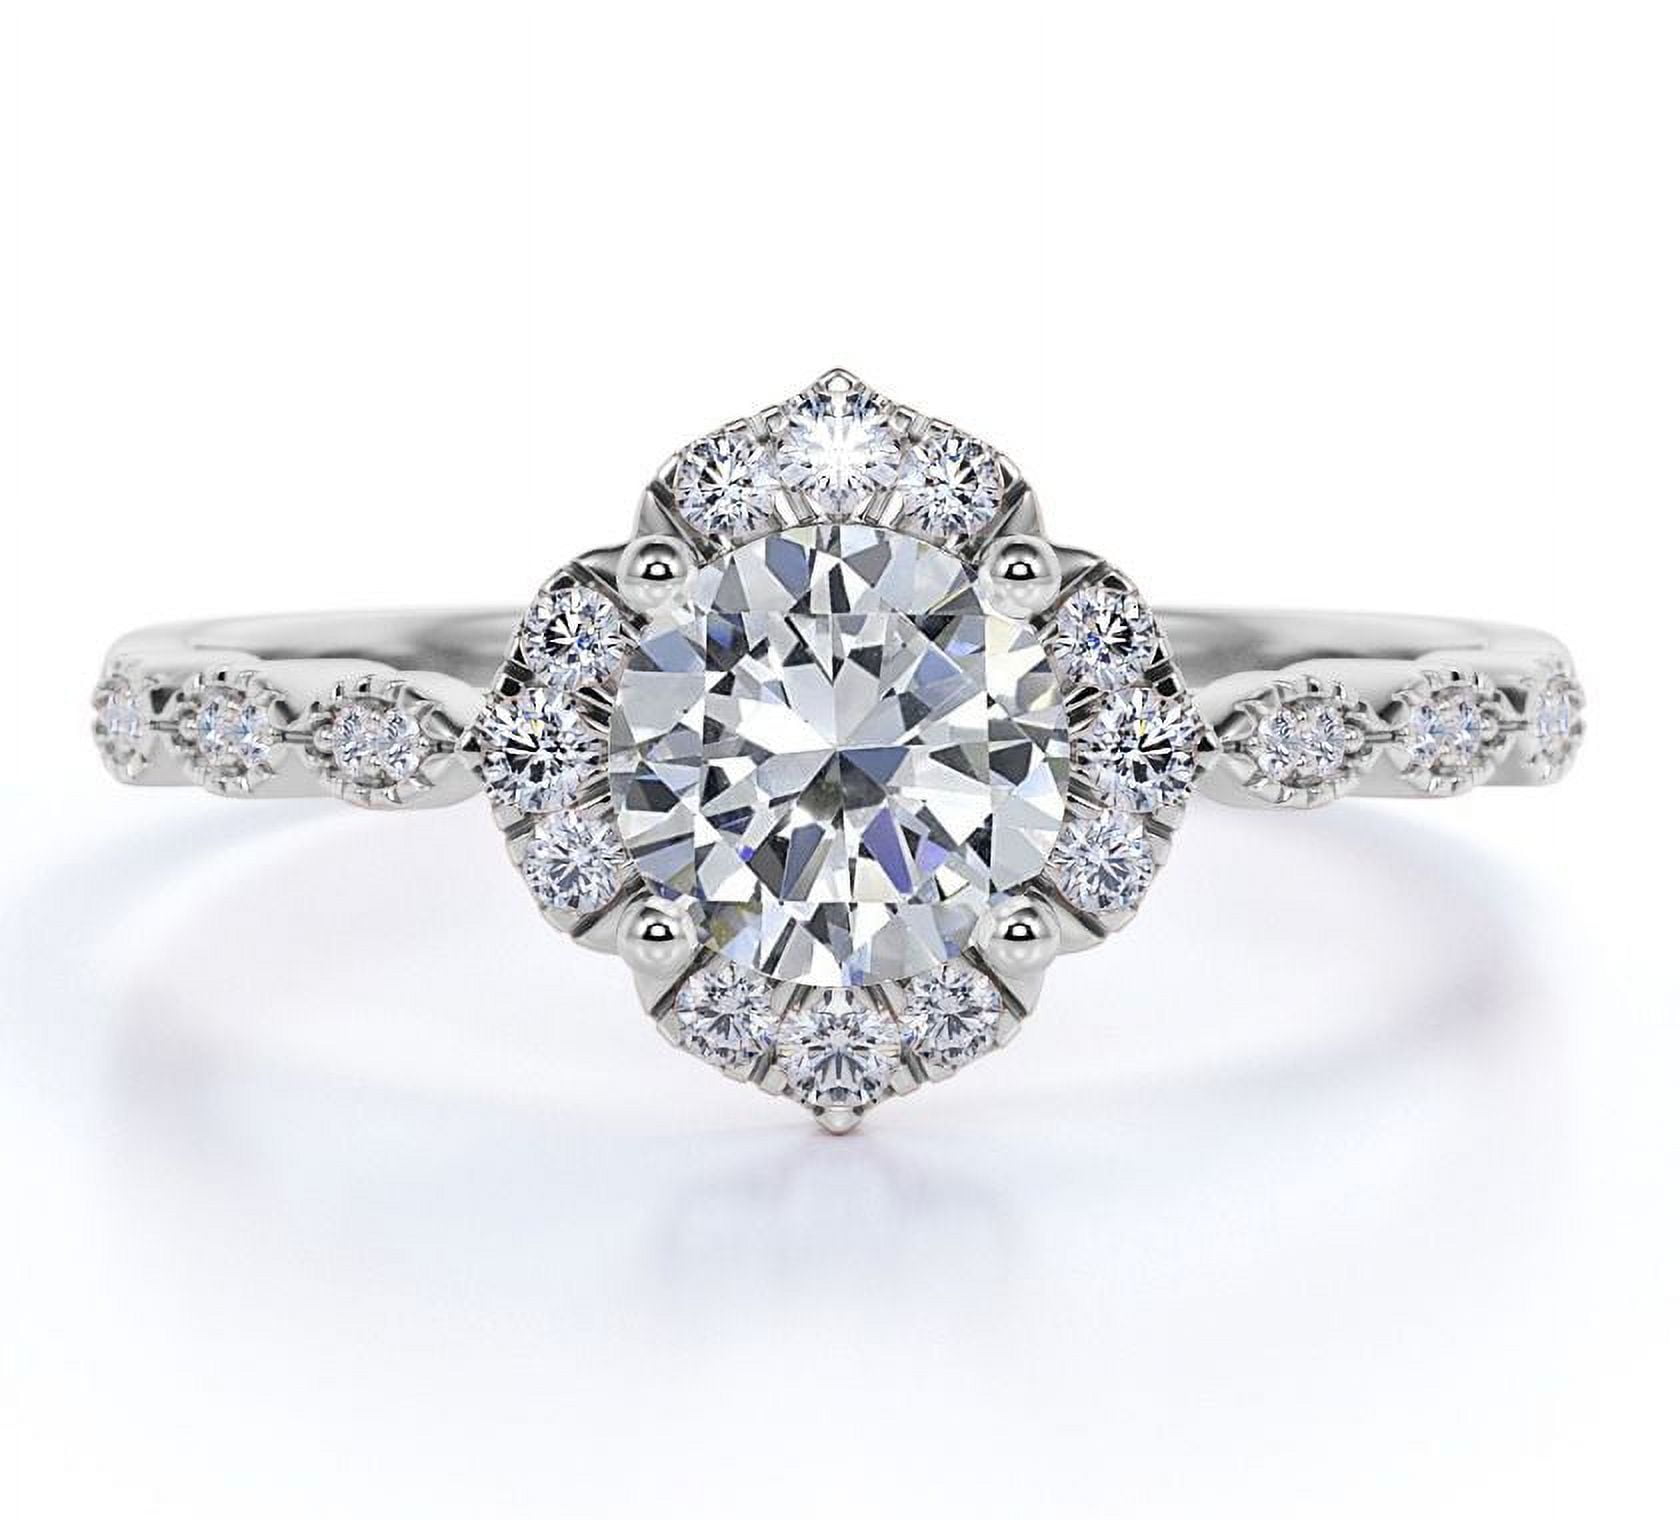 Vista Halo Engagement Ring for 1 ct Cushion | Shane Co.